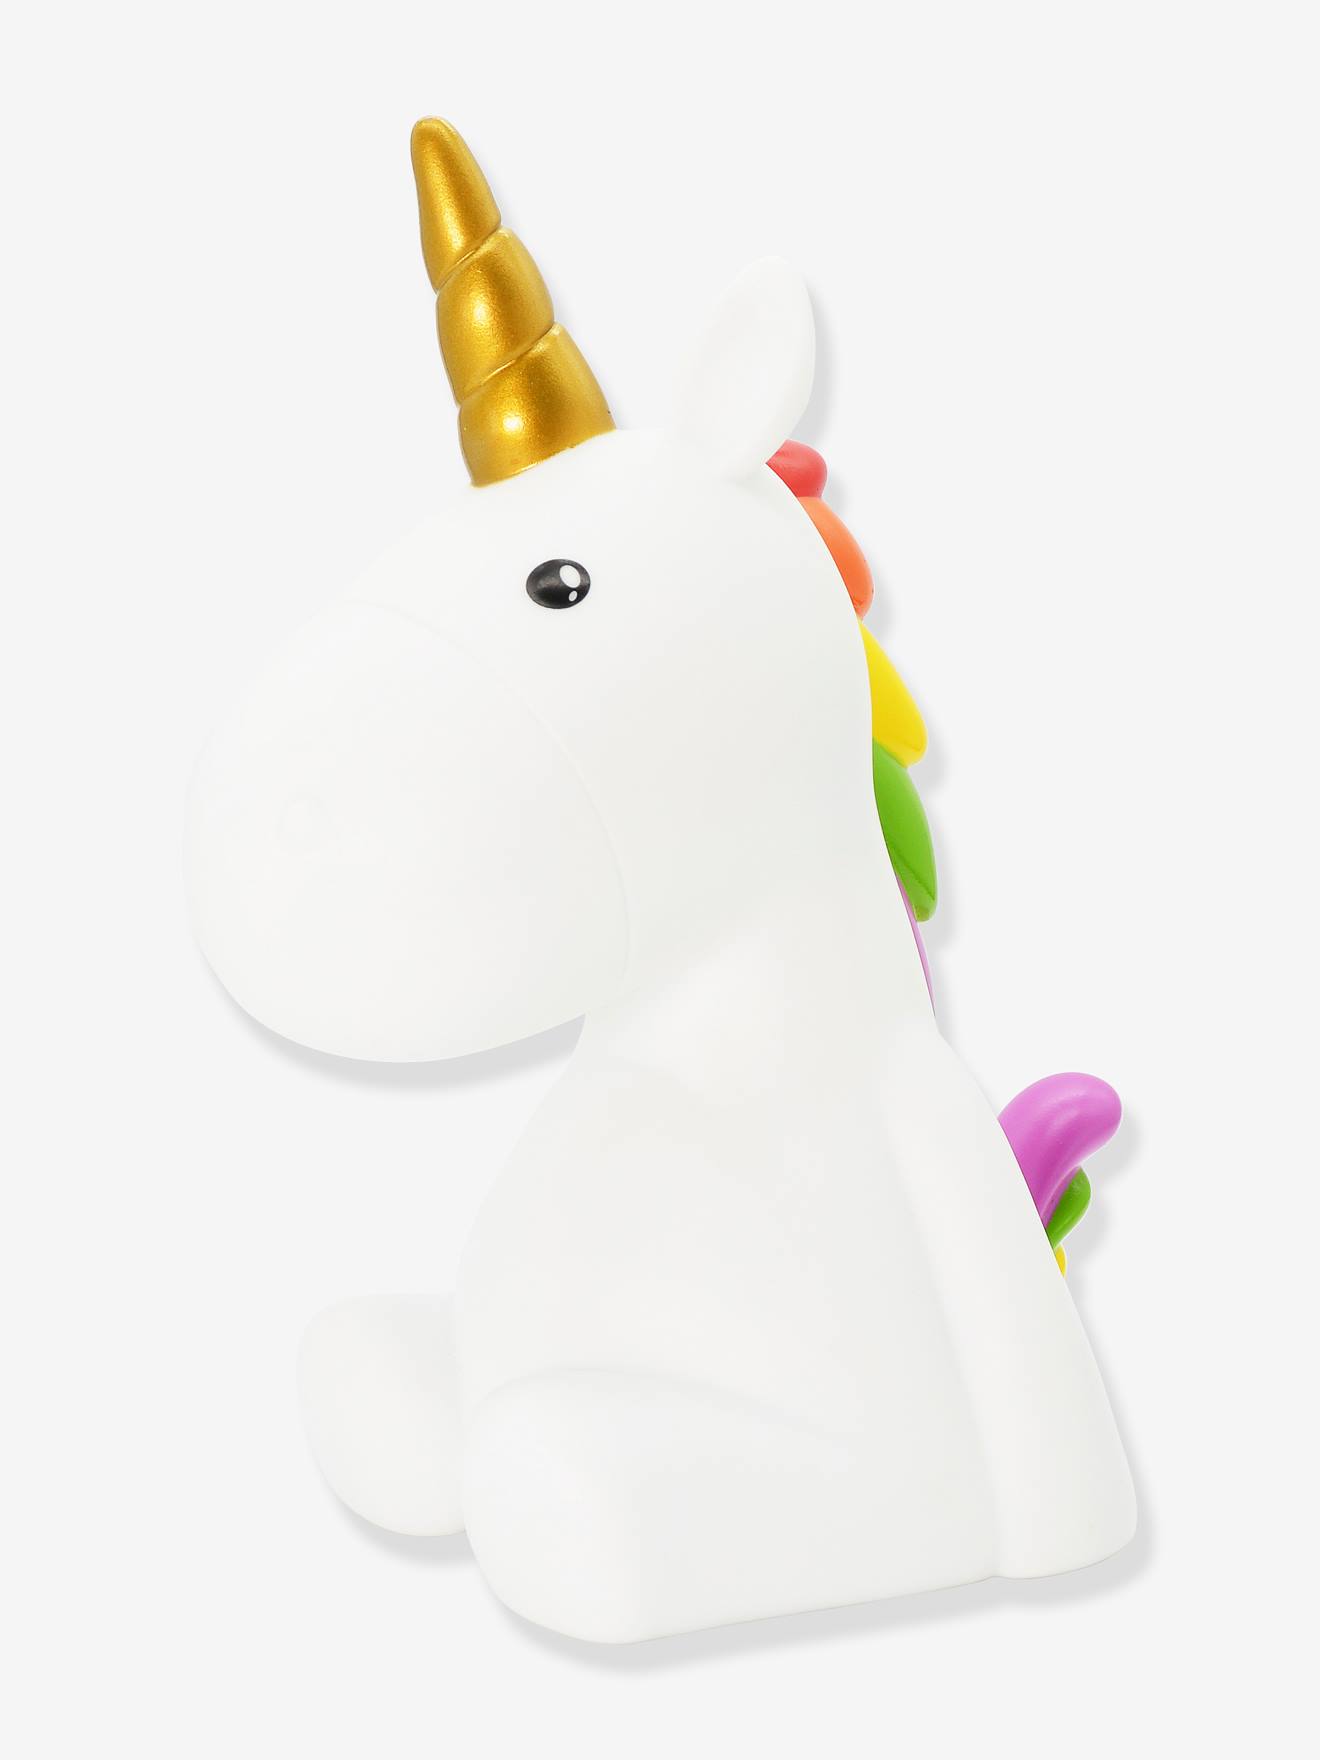 VEILLEUSE LICORNE RECHARGEABLE